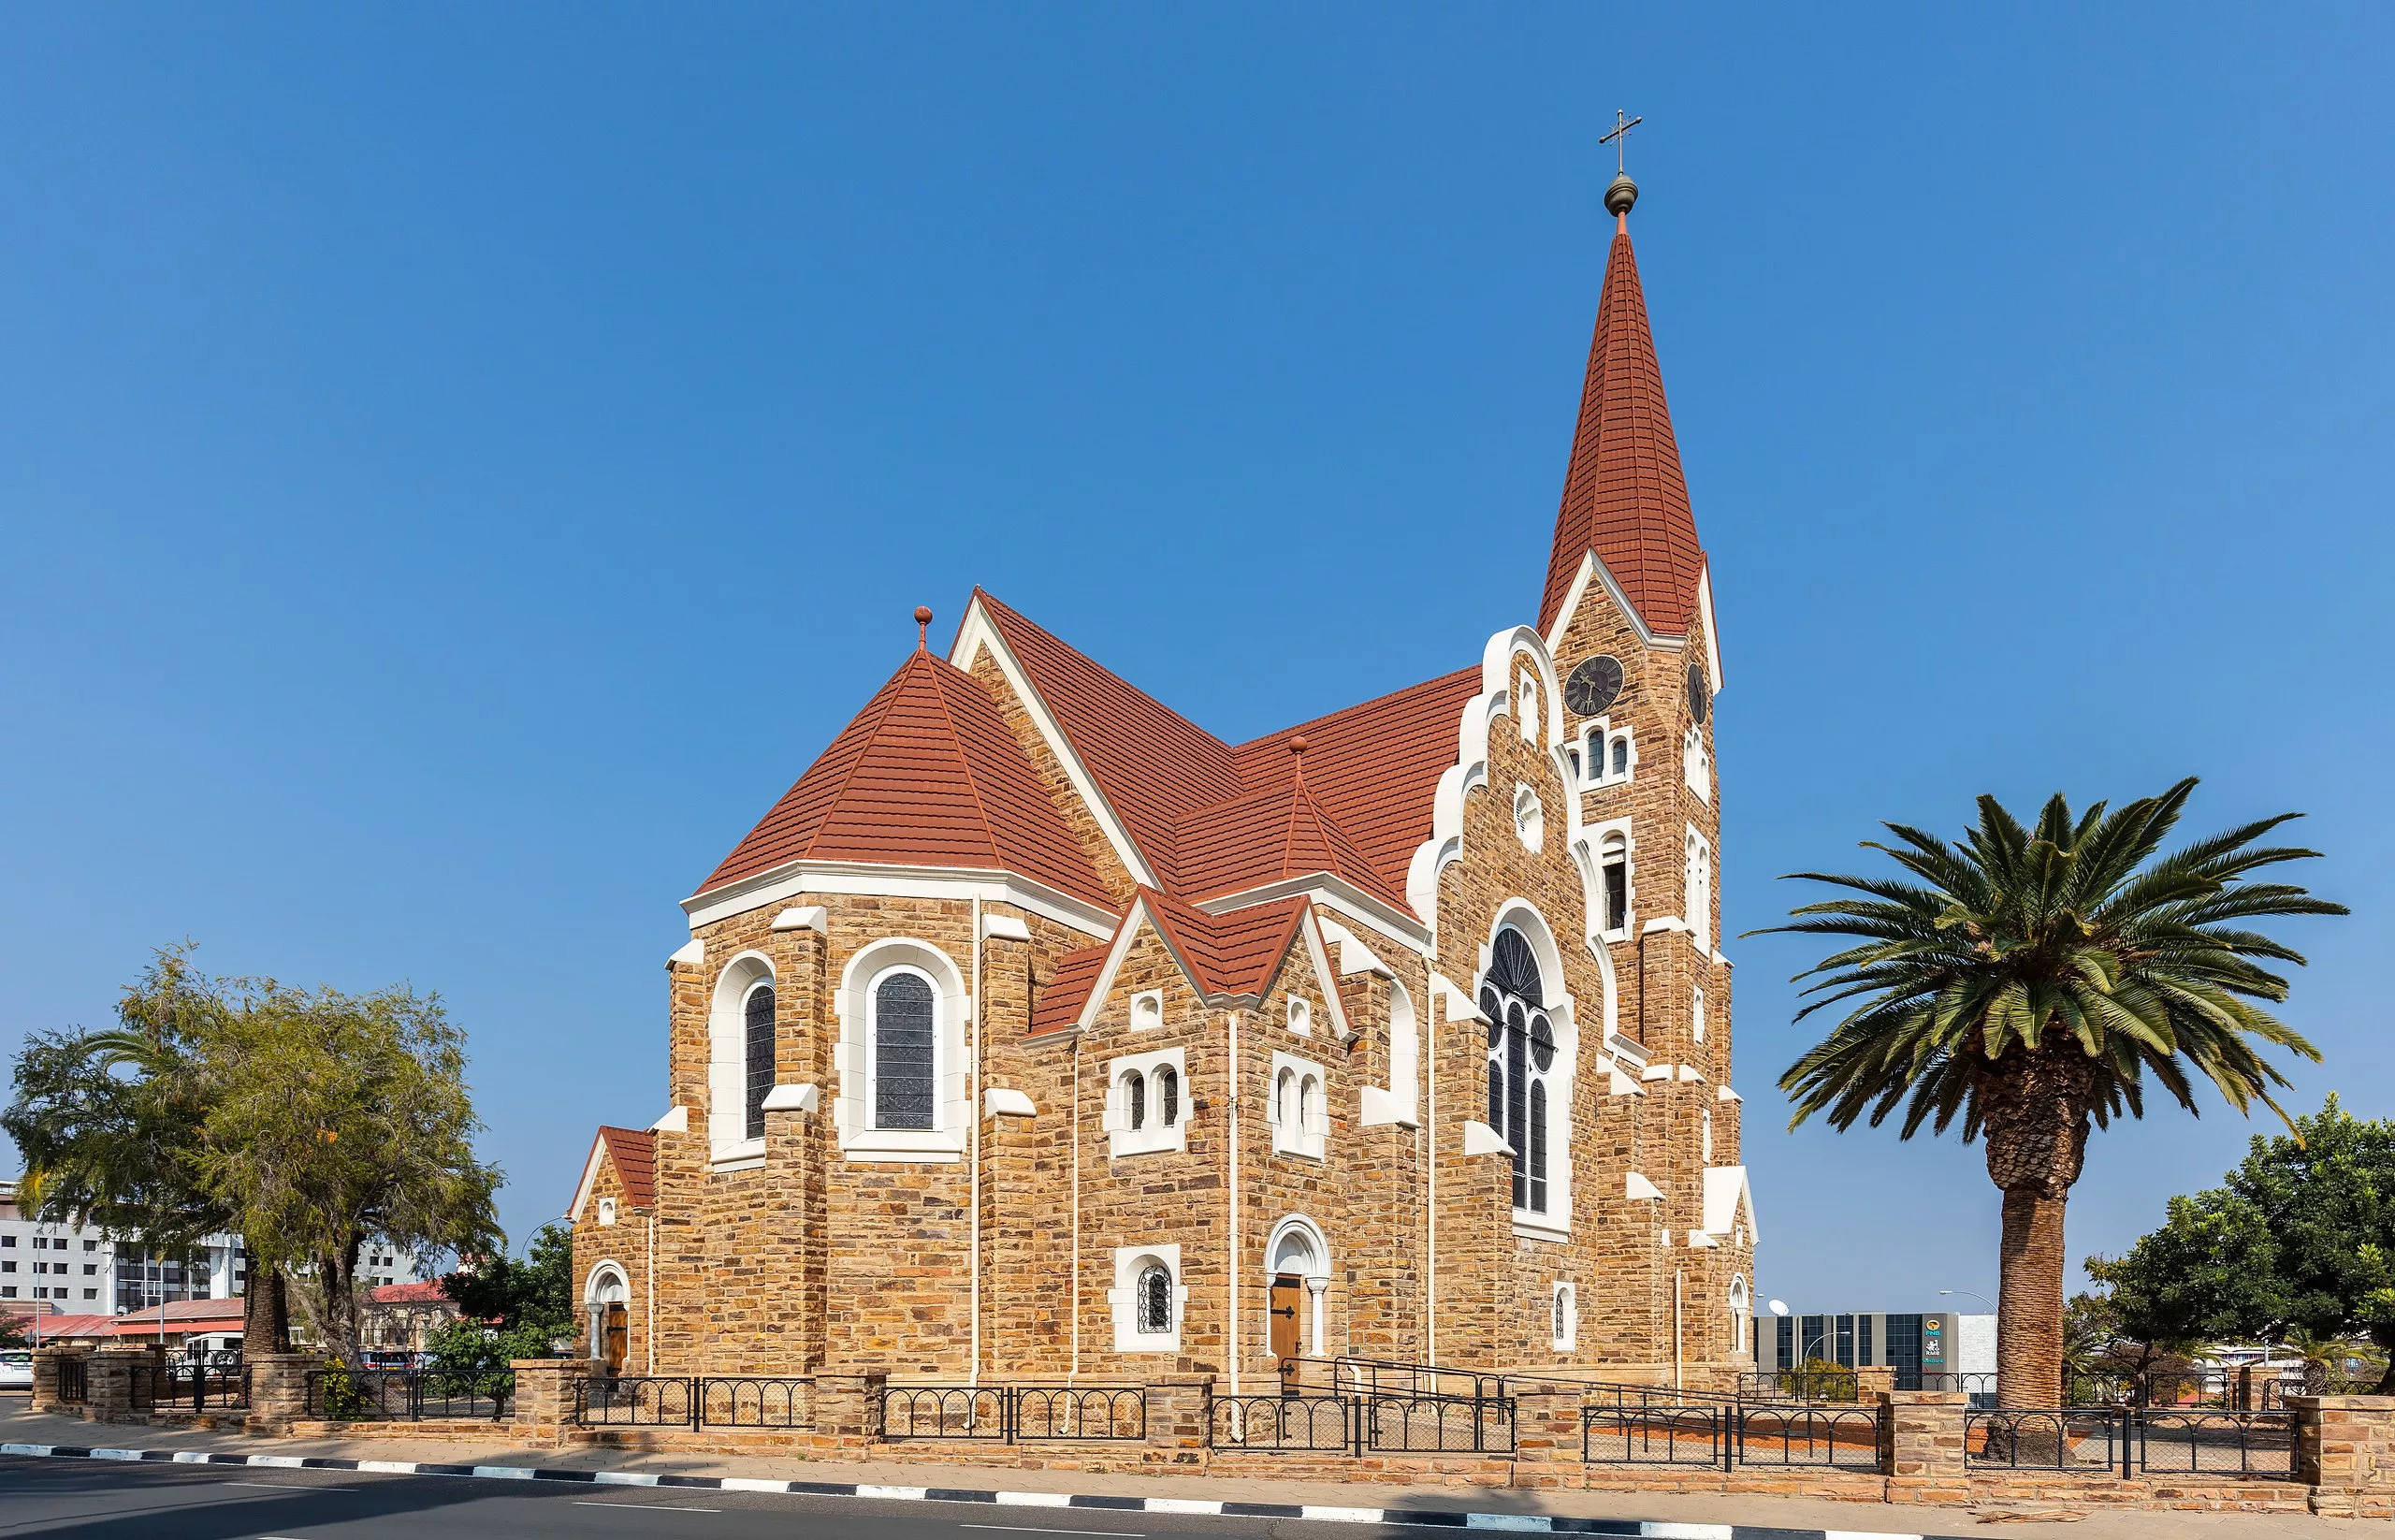 Christ Church in Namibia, Africa | Architecture - Rated 3.4